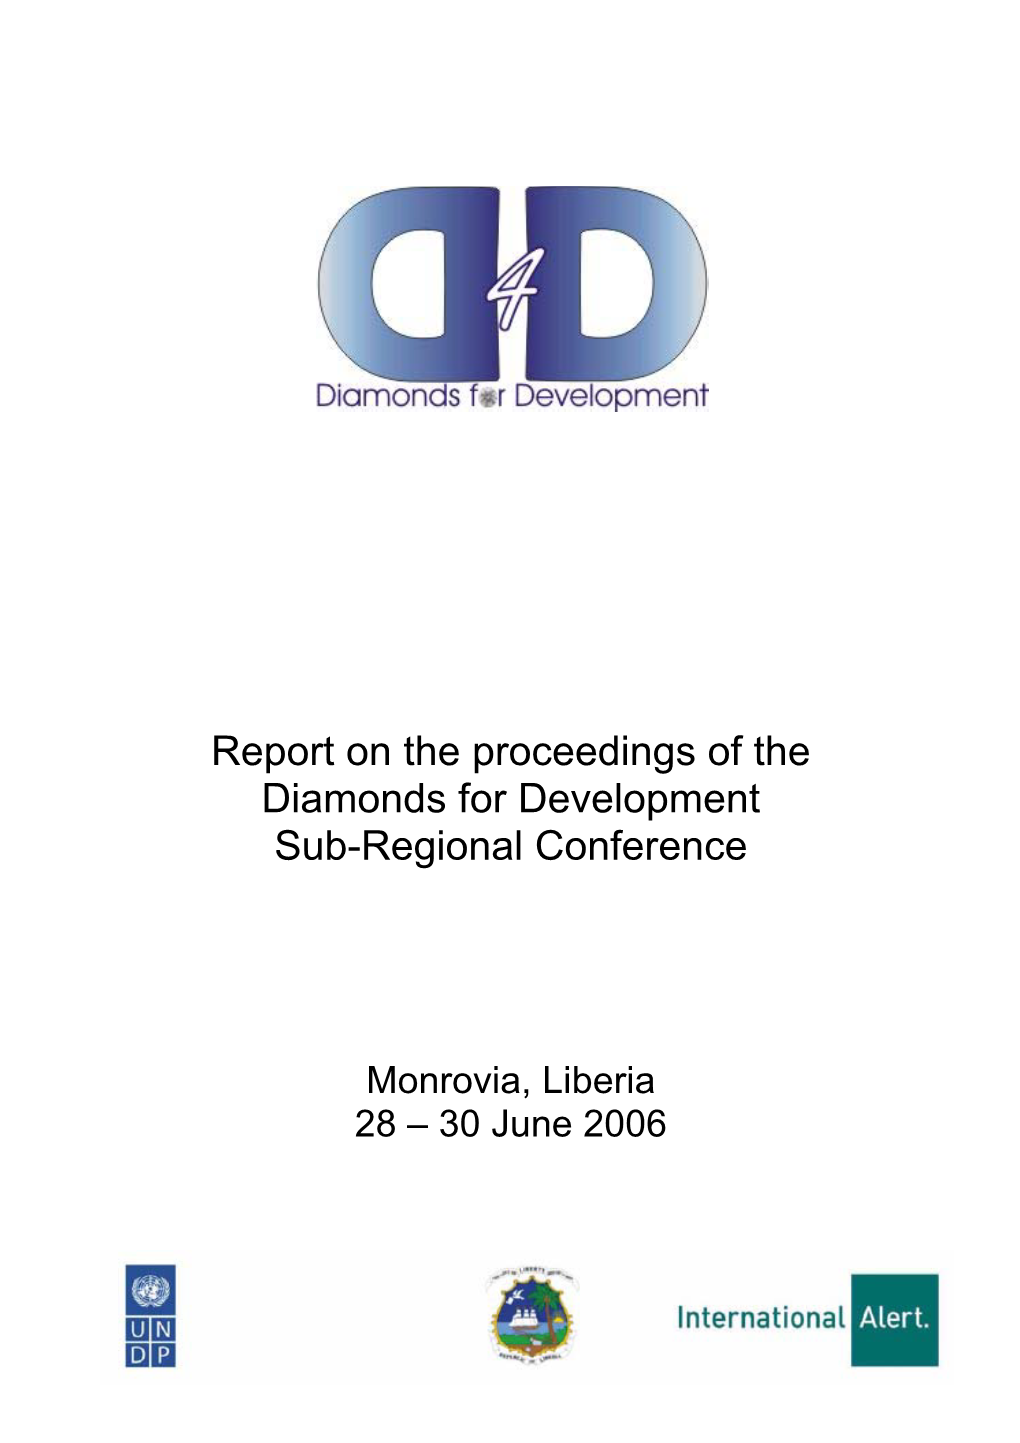 Report on the Proceedings of the Diamonds for Development Sub-Regional Conference